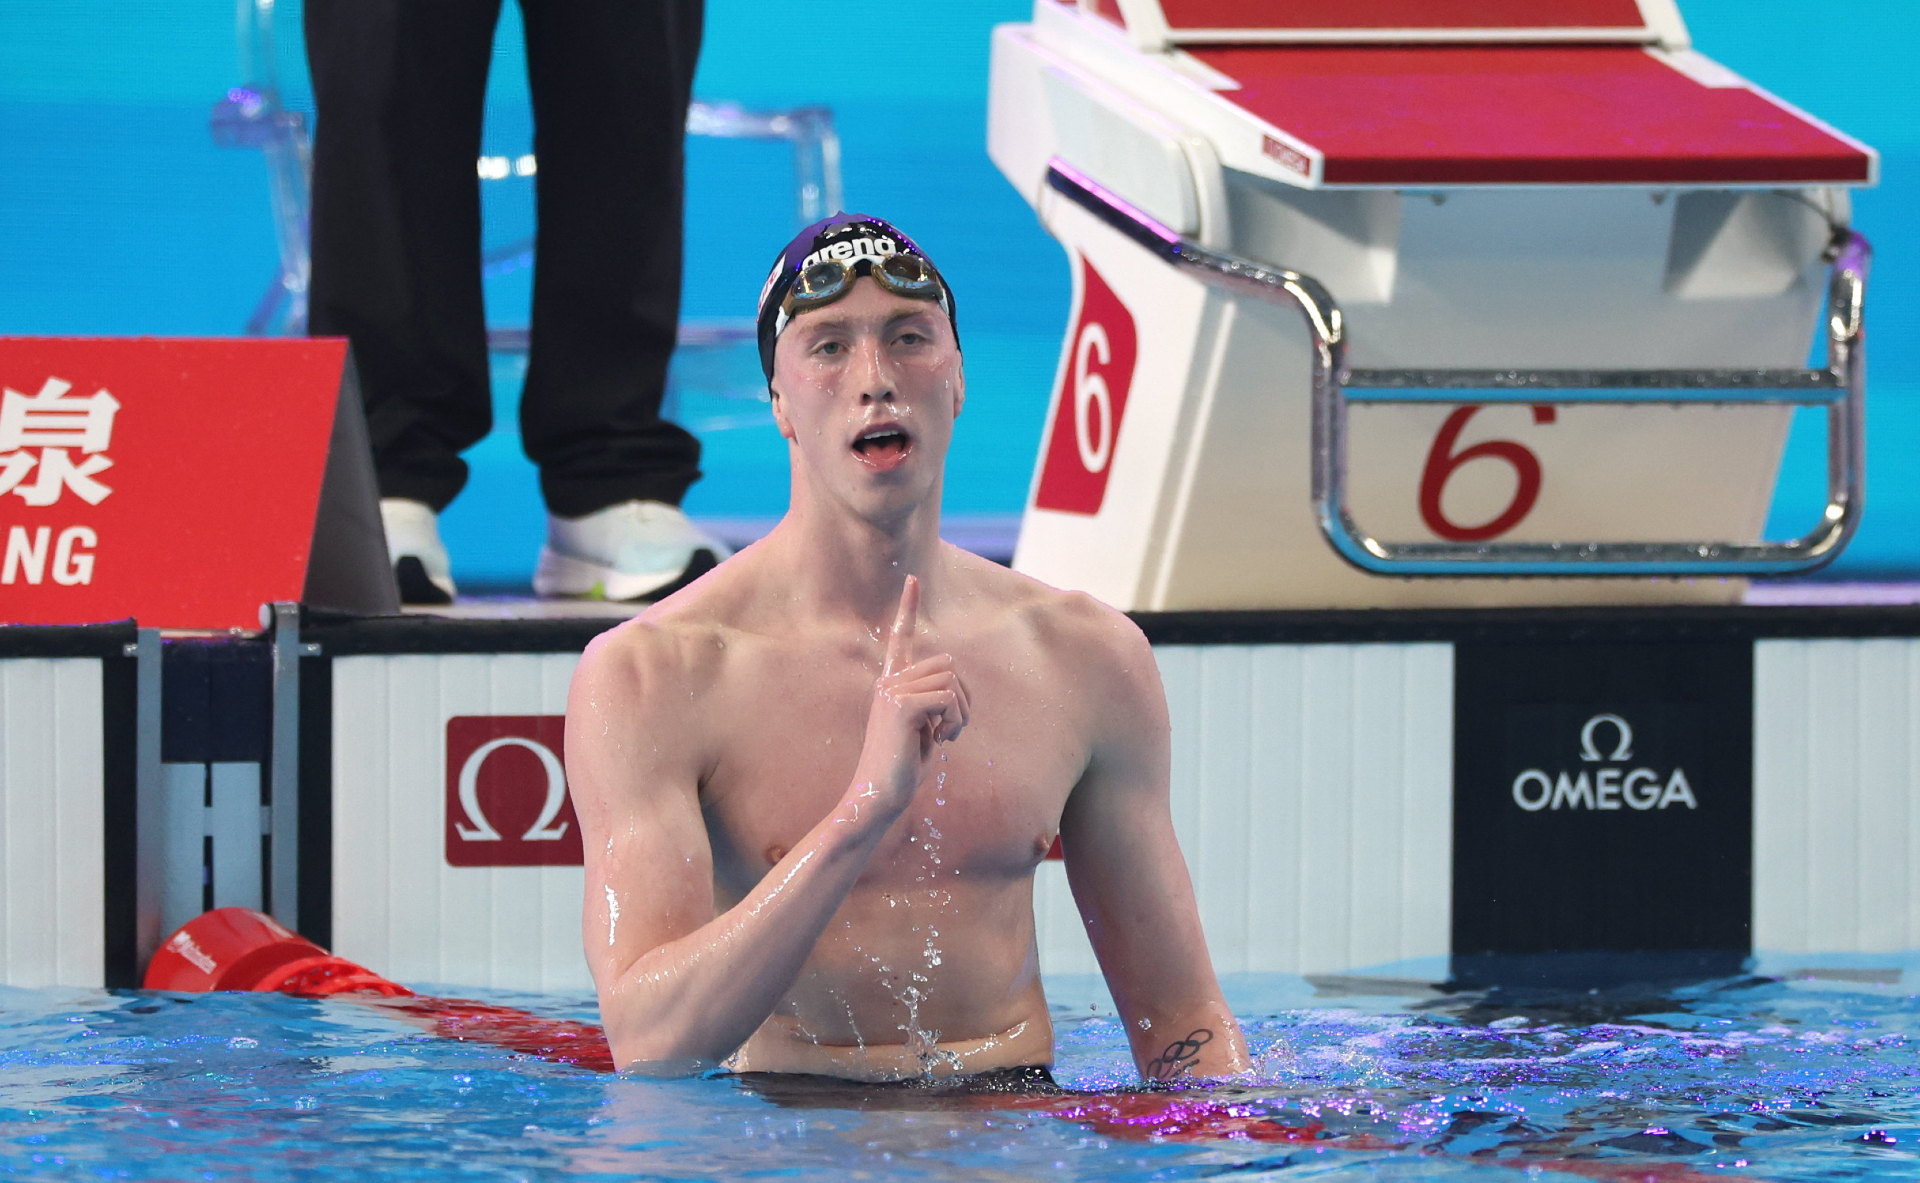 Daniel Wiffen reacts after winning gold in the Men's 1500m freestyle,